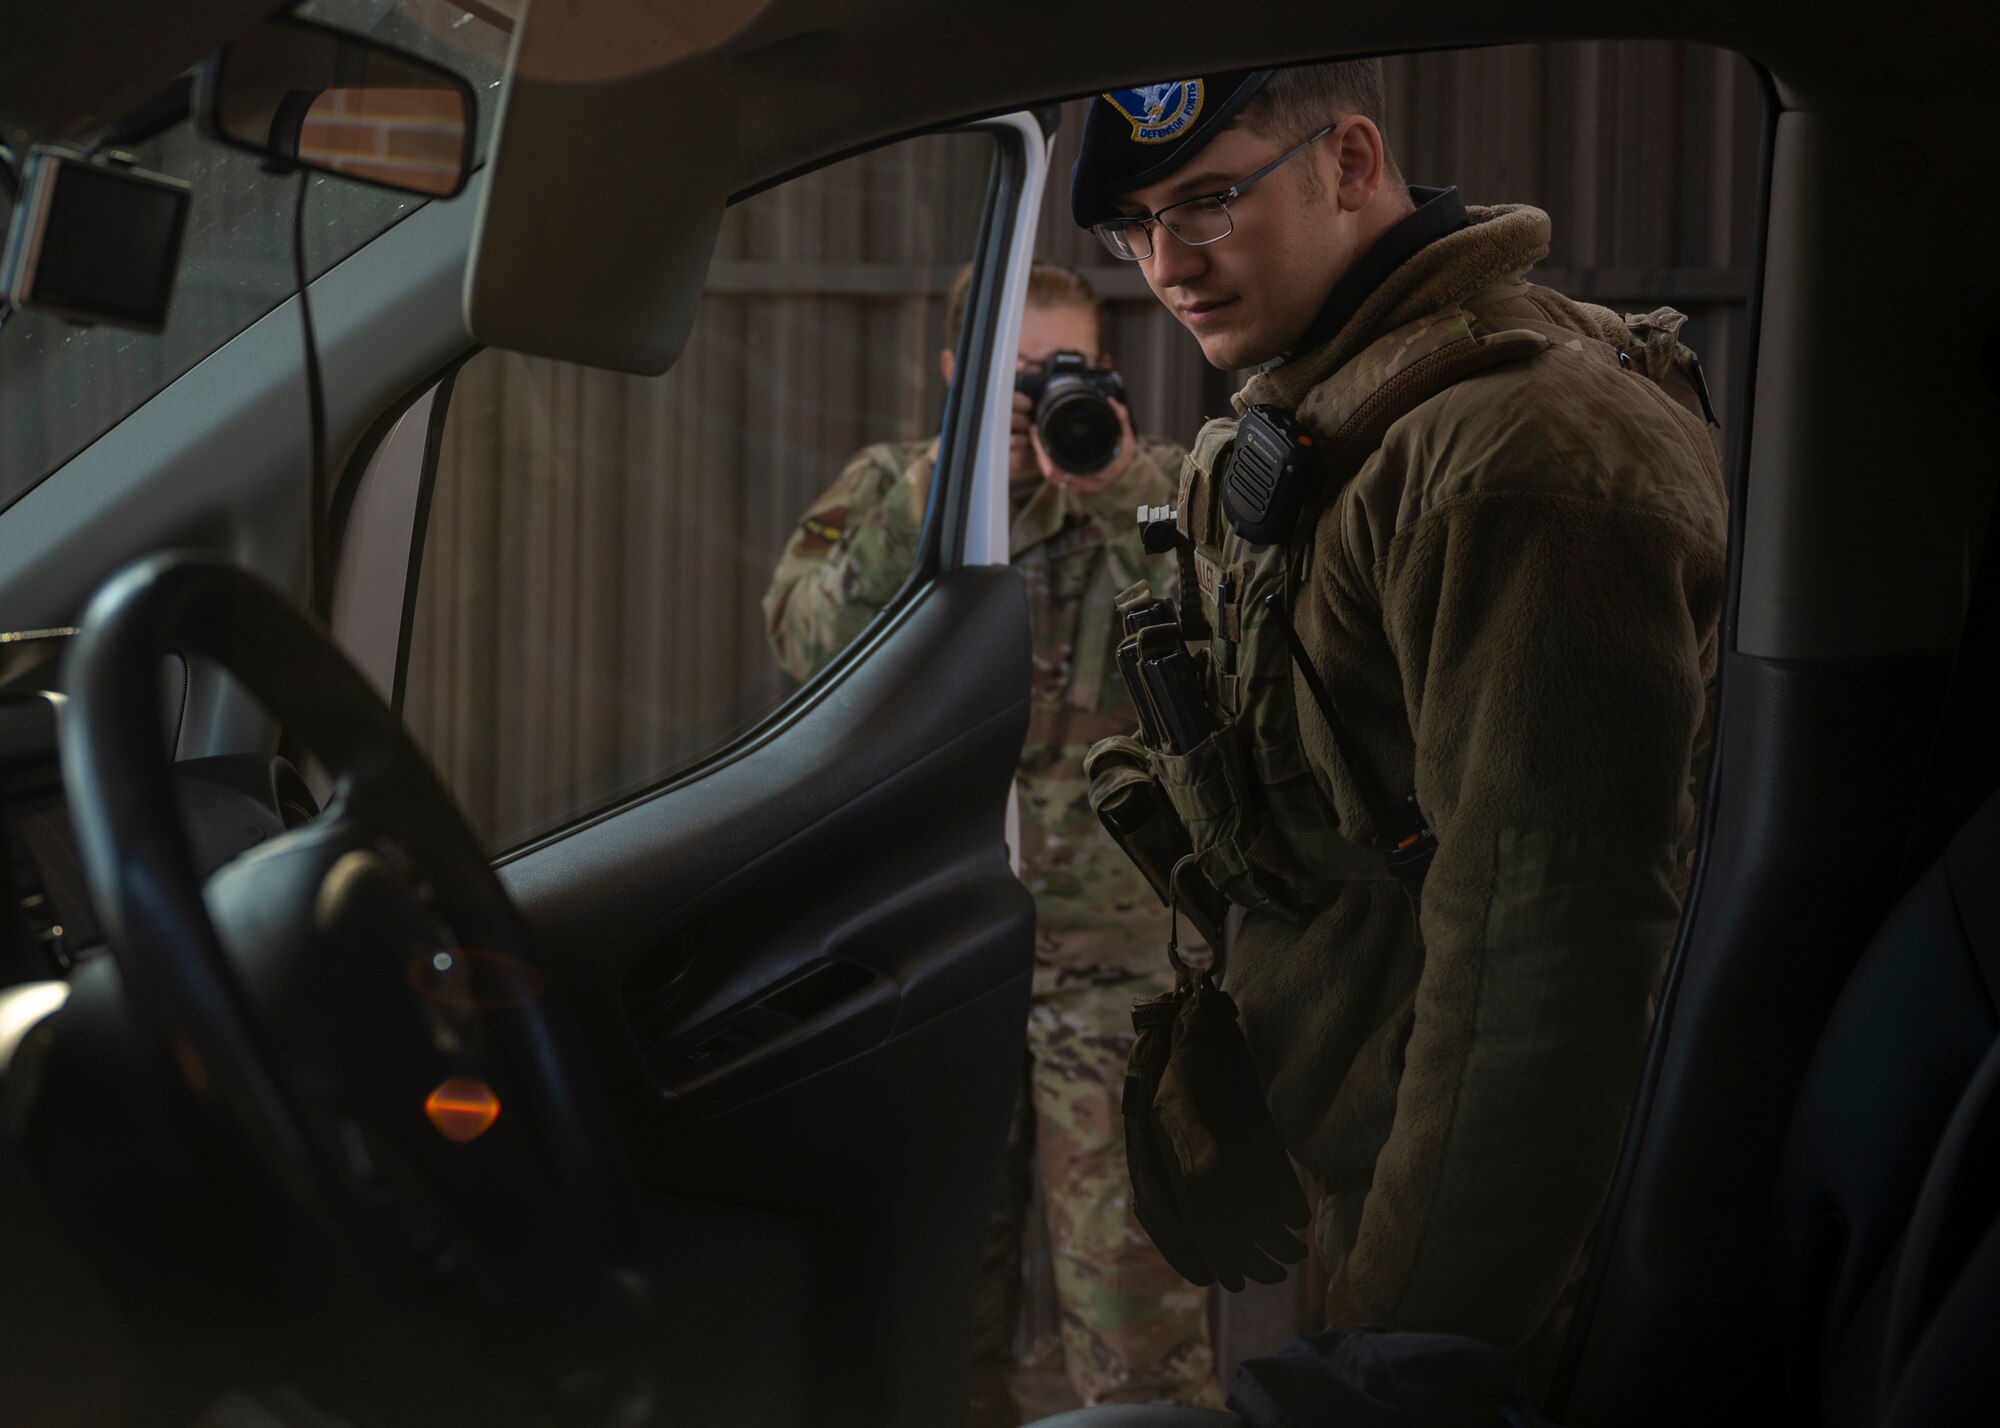 Airman 1st Class Sven Fuller, 4th Security Forces Squadron entry controller, inspects a vehicle at a check point as his younger sister, Airman 1st Class Sabrina, 4th Fighter Wing public affairs specialist, takes his photo at Seymour Johnson Air Force Base, North Carolina, Dec. 7, 2021.